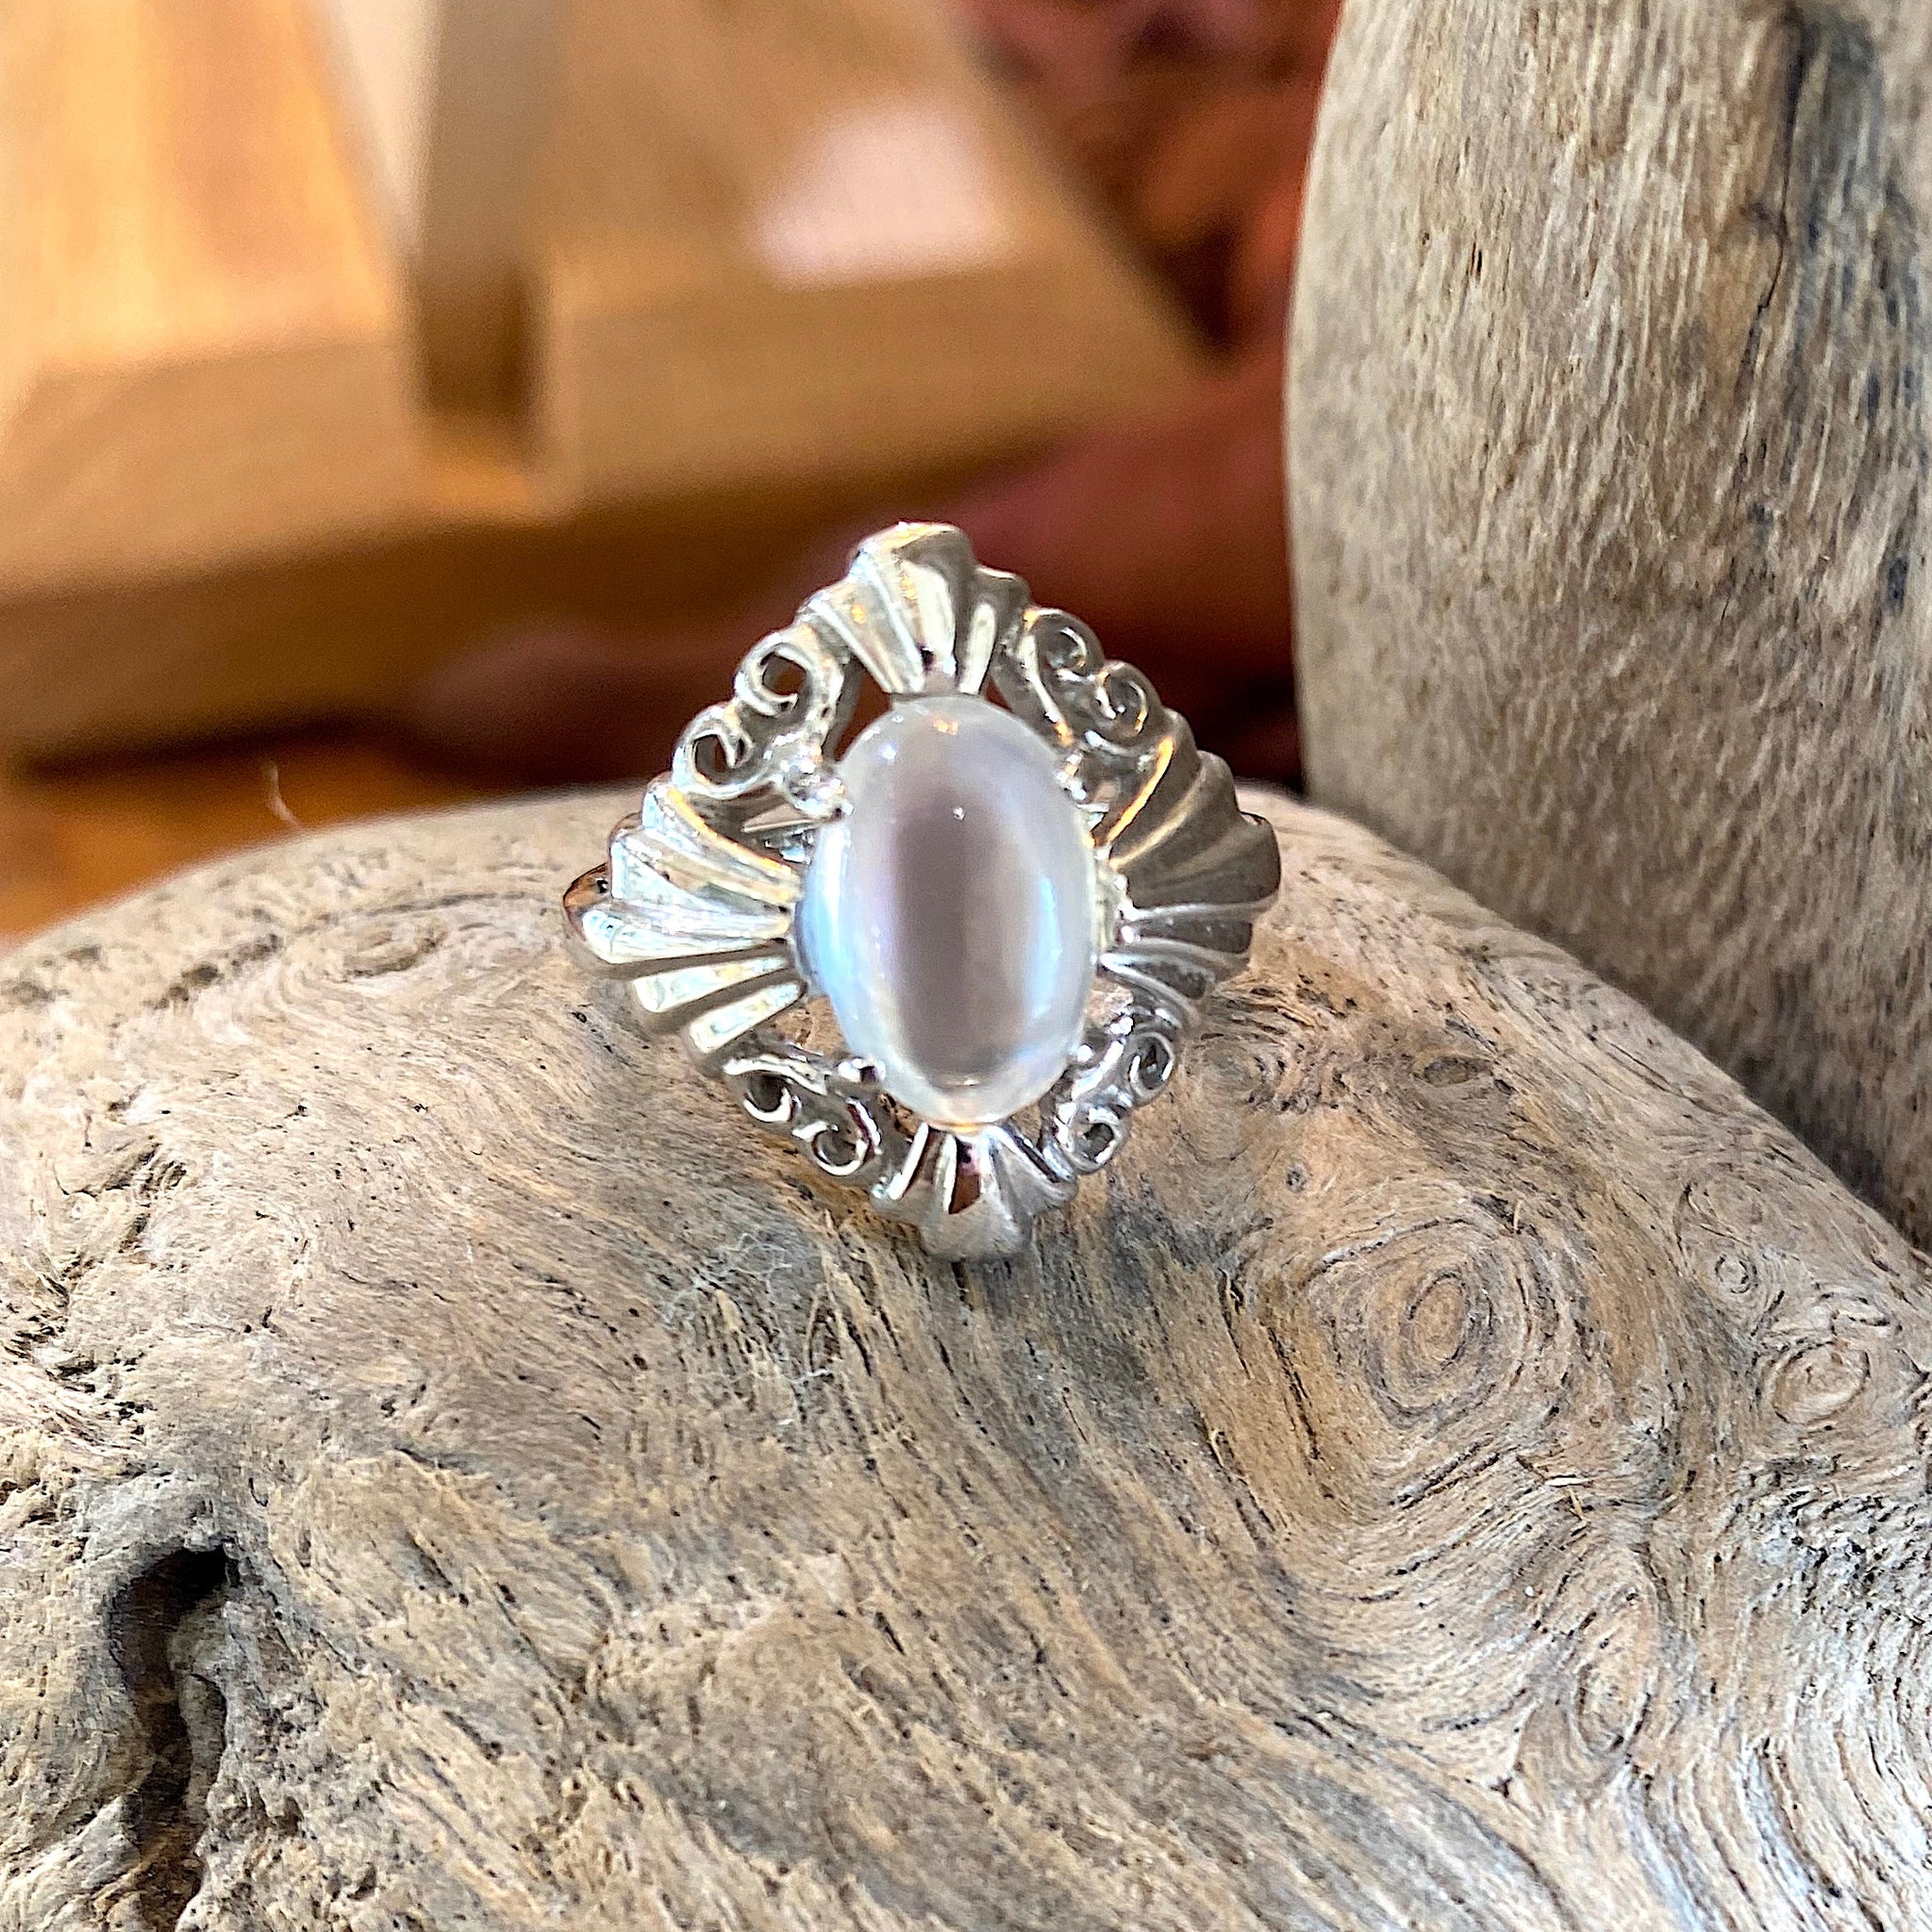 Amazon.com: 925 Sterling Silver Ring For Womens Natural Moonstone Ring  Sterling Silver Boho Ring June Birthstone White Gemstone Ring : Handmade  Products